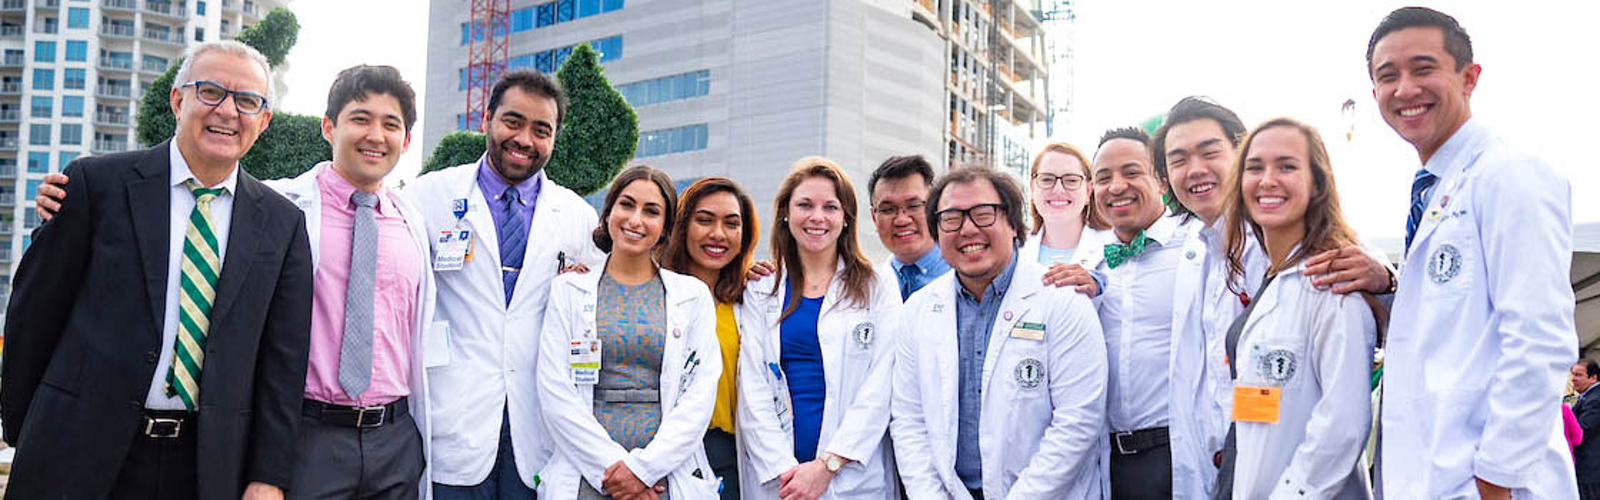 Dr. Panos Vasiloudes poses with medical students at the November topping off-ceremony for the new USF Health Morsani College of Medicine and Heart Institute.